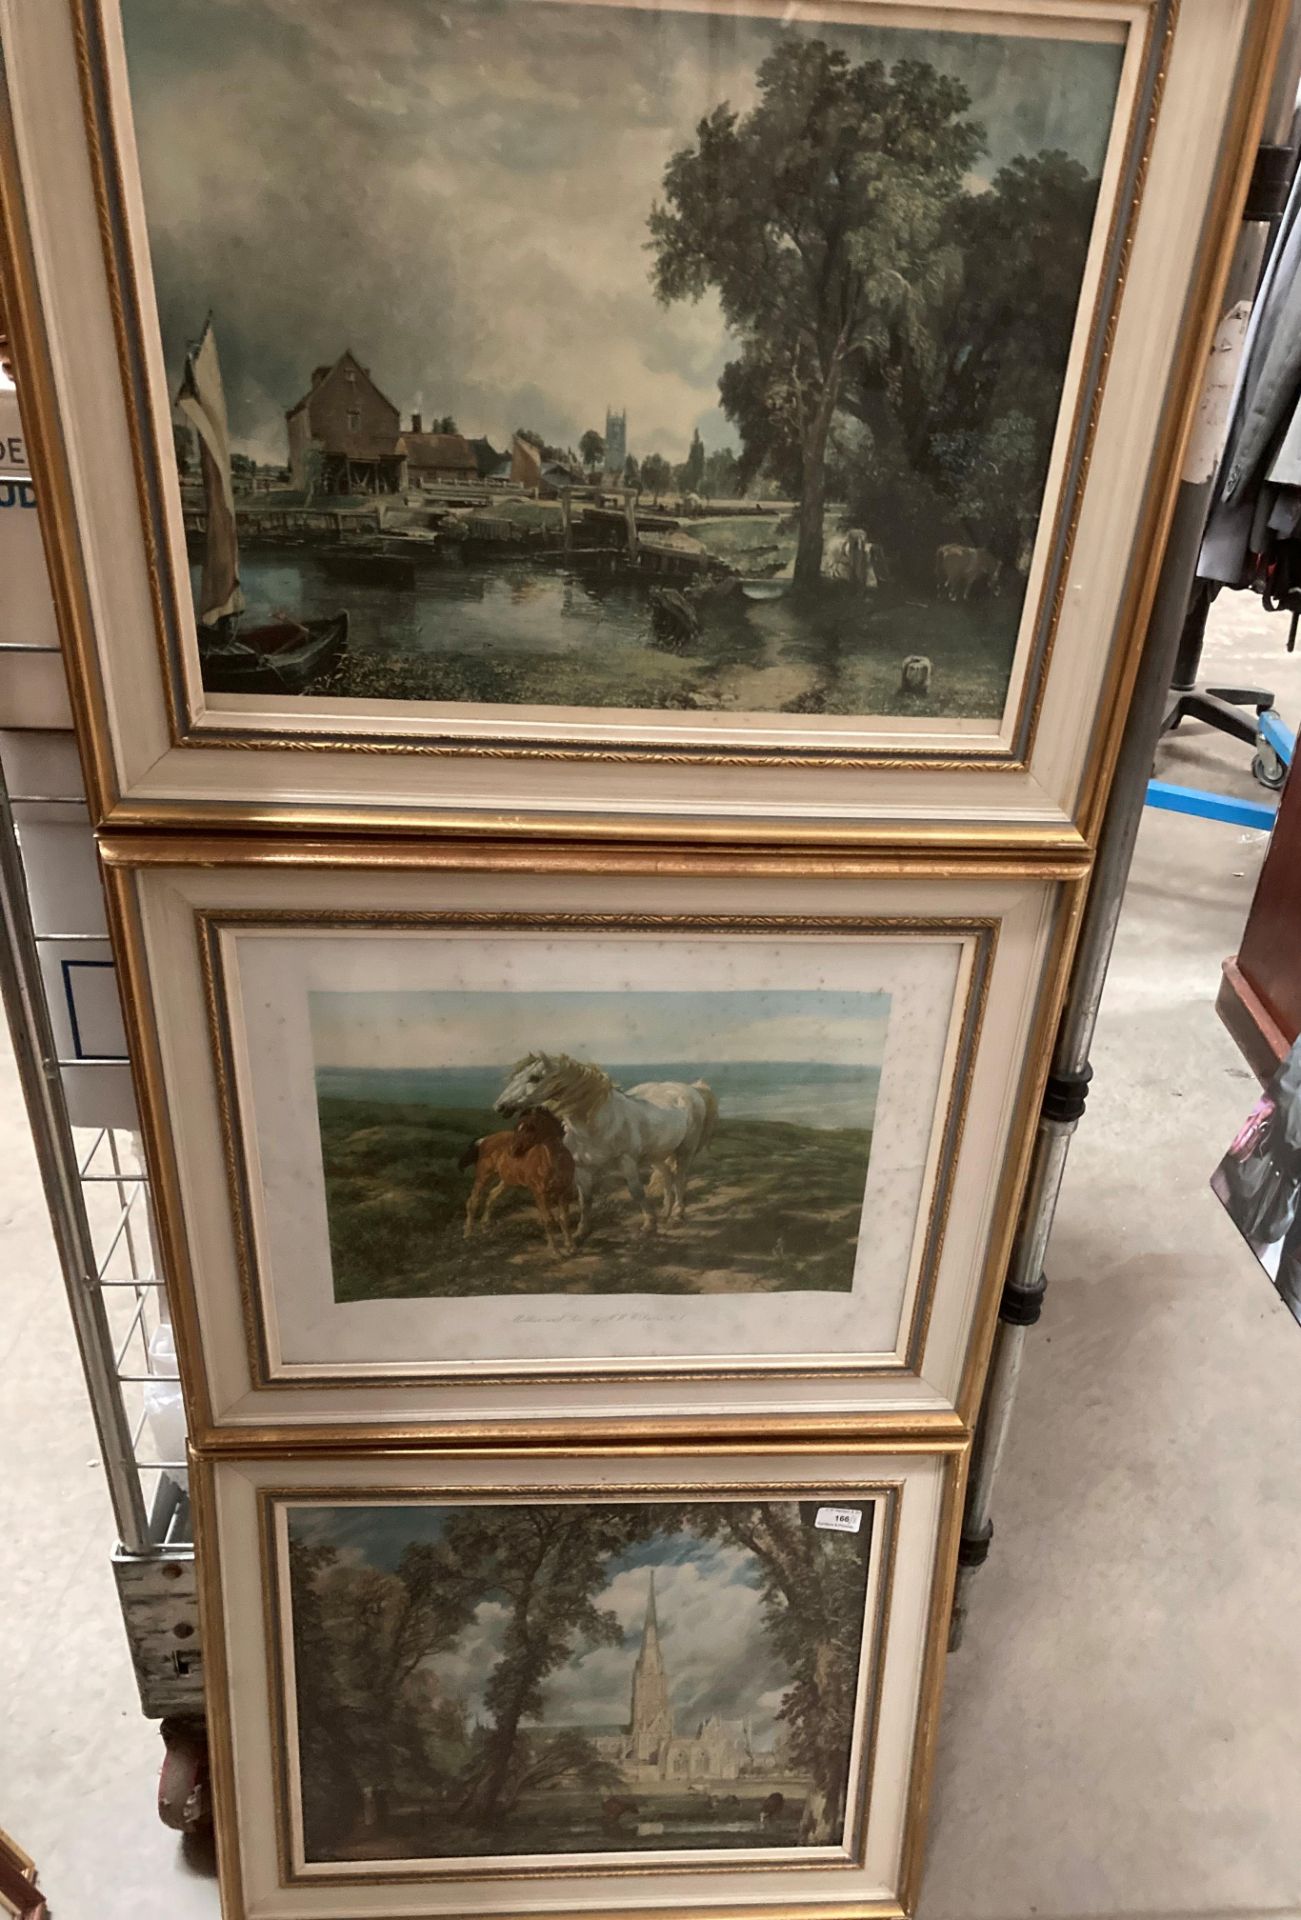 Three framed prints of famous Nineteenth Century paintings by Constable, Turner and Davies.